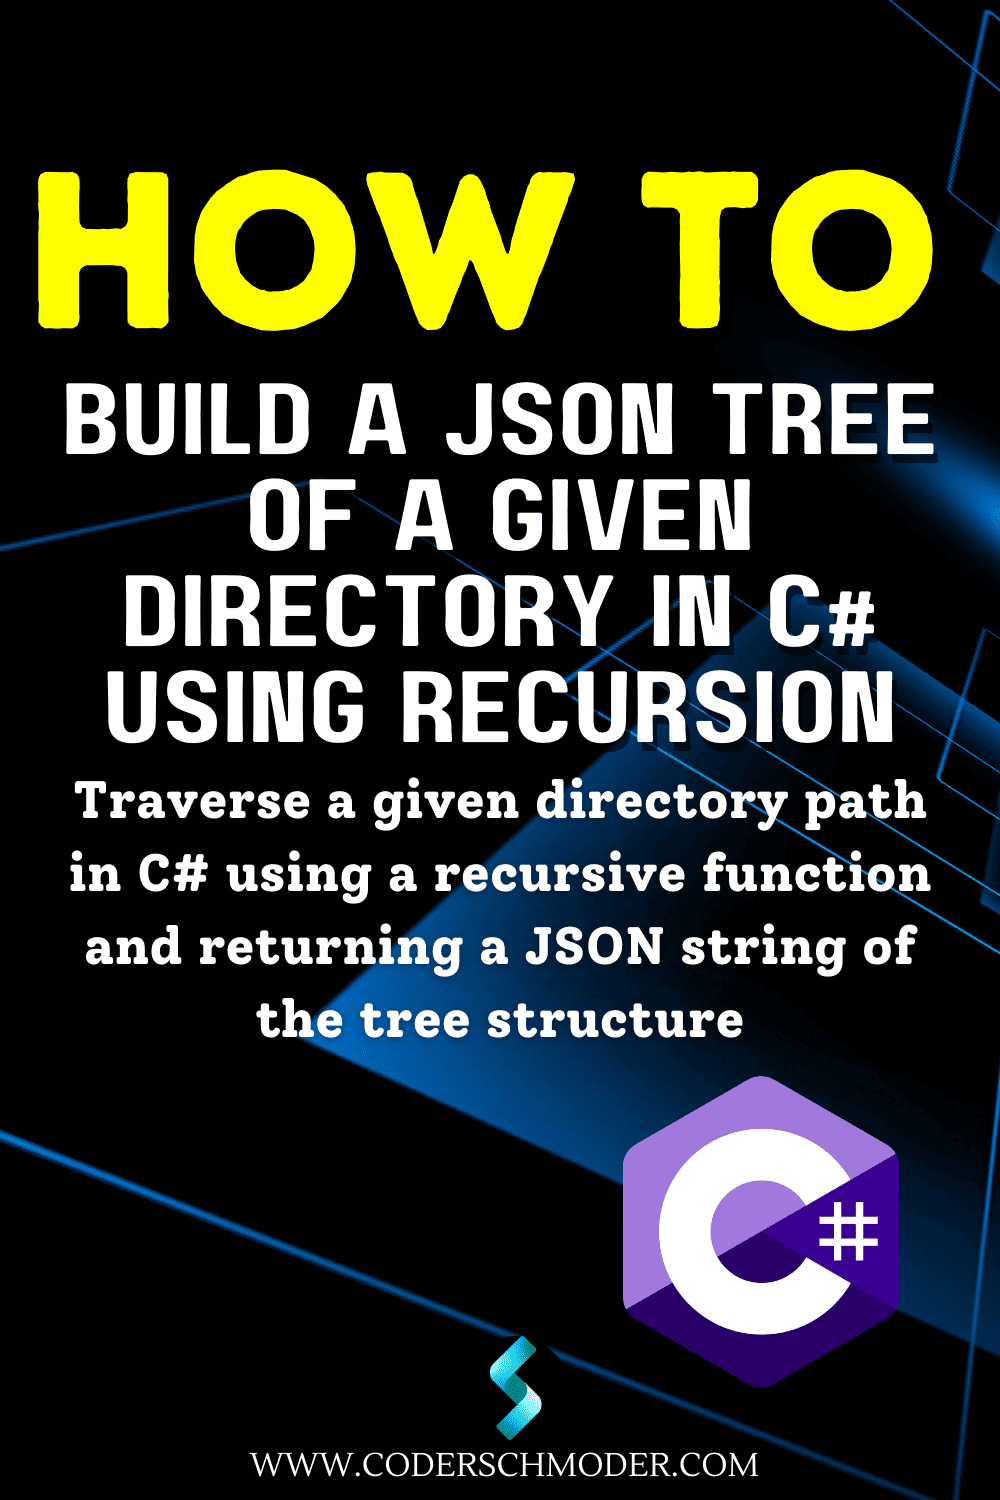 How to build a JSON tree of a given directory in C# using recursion